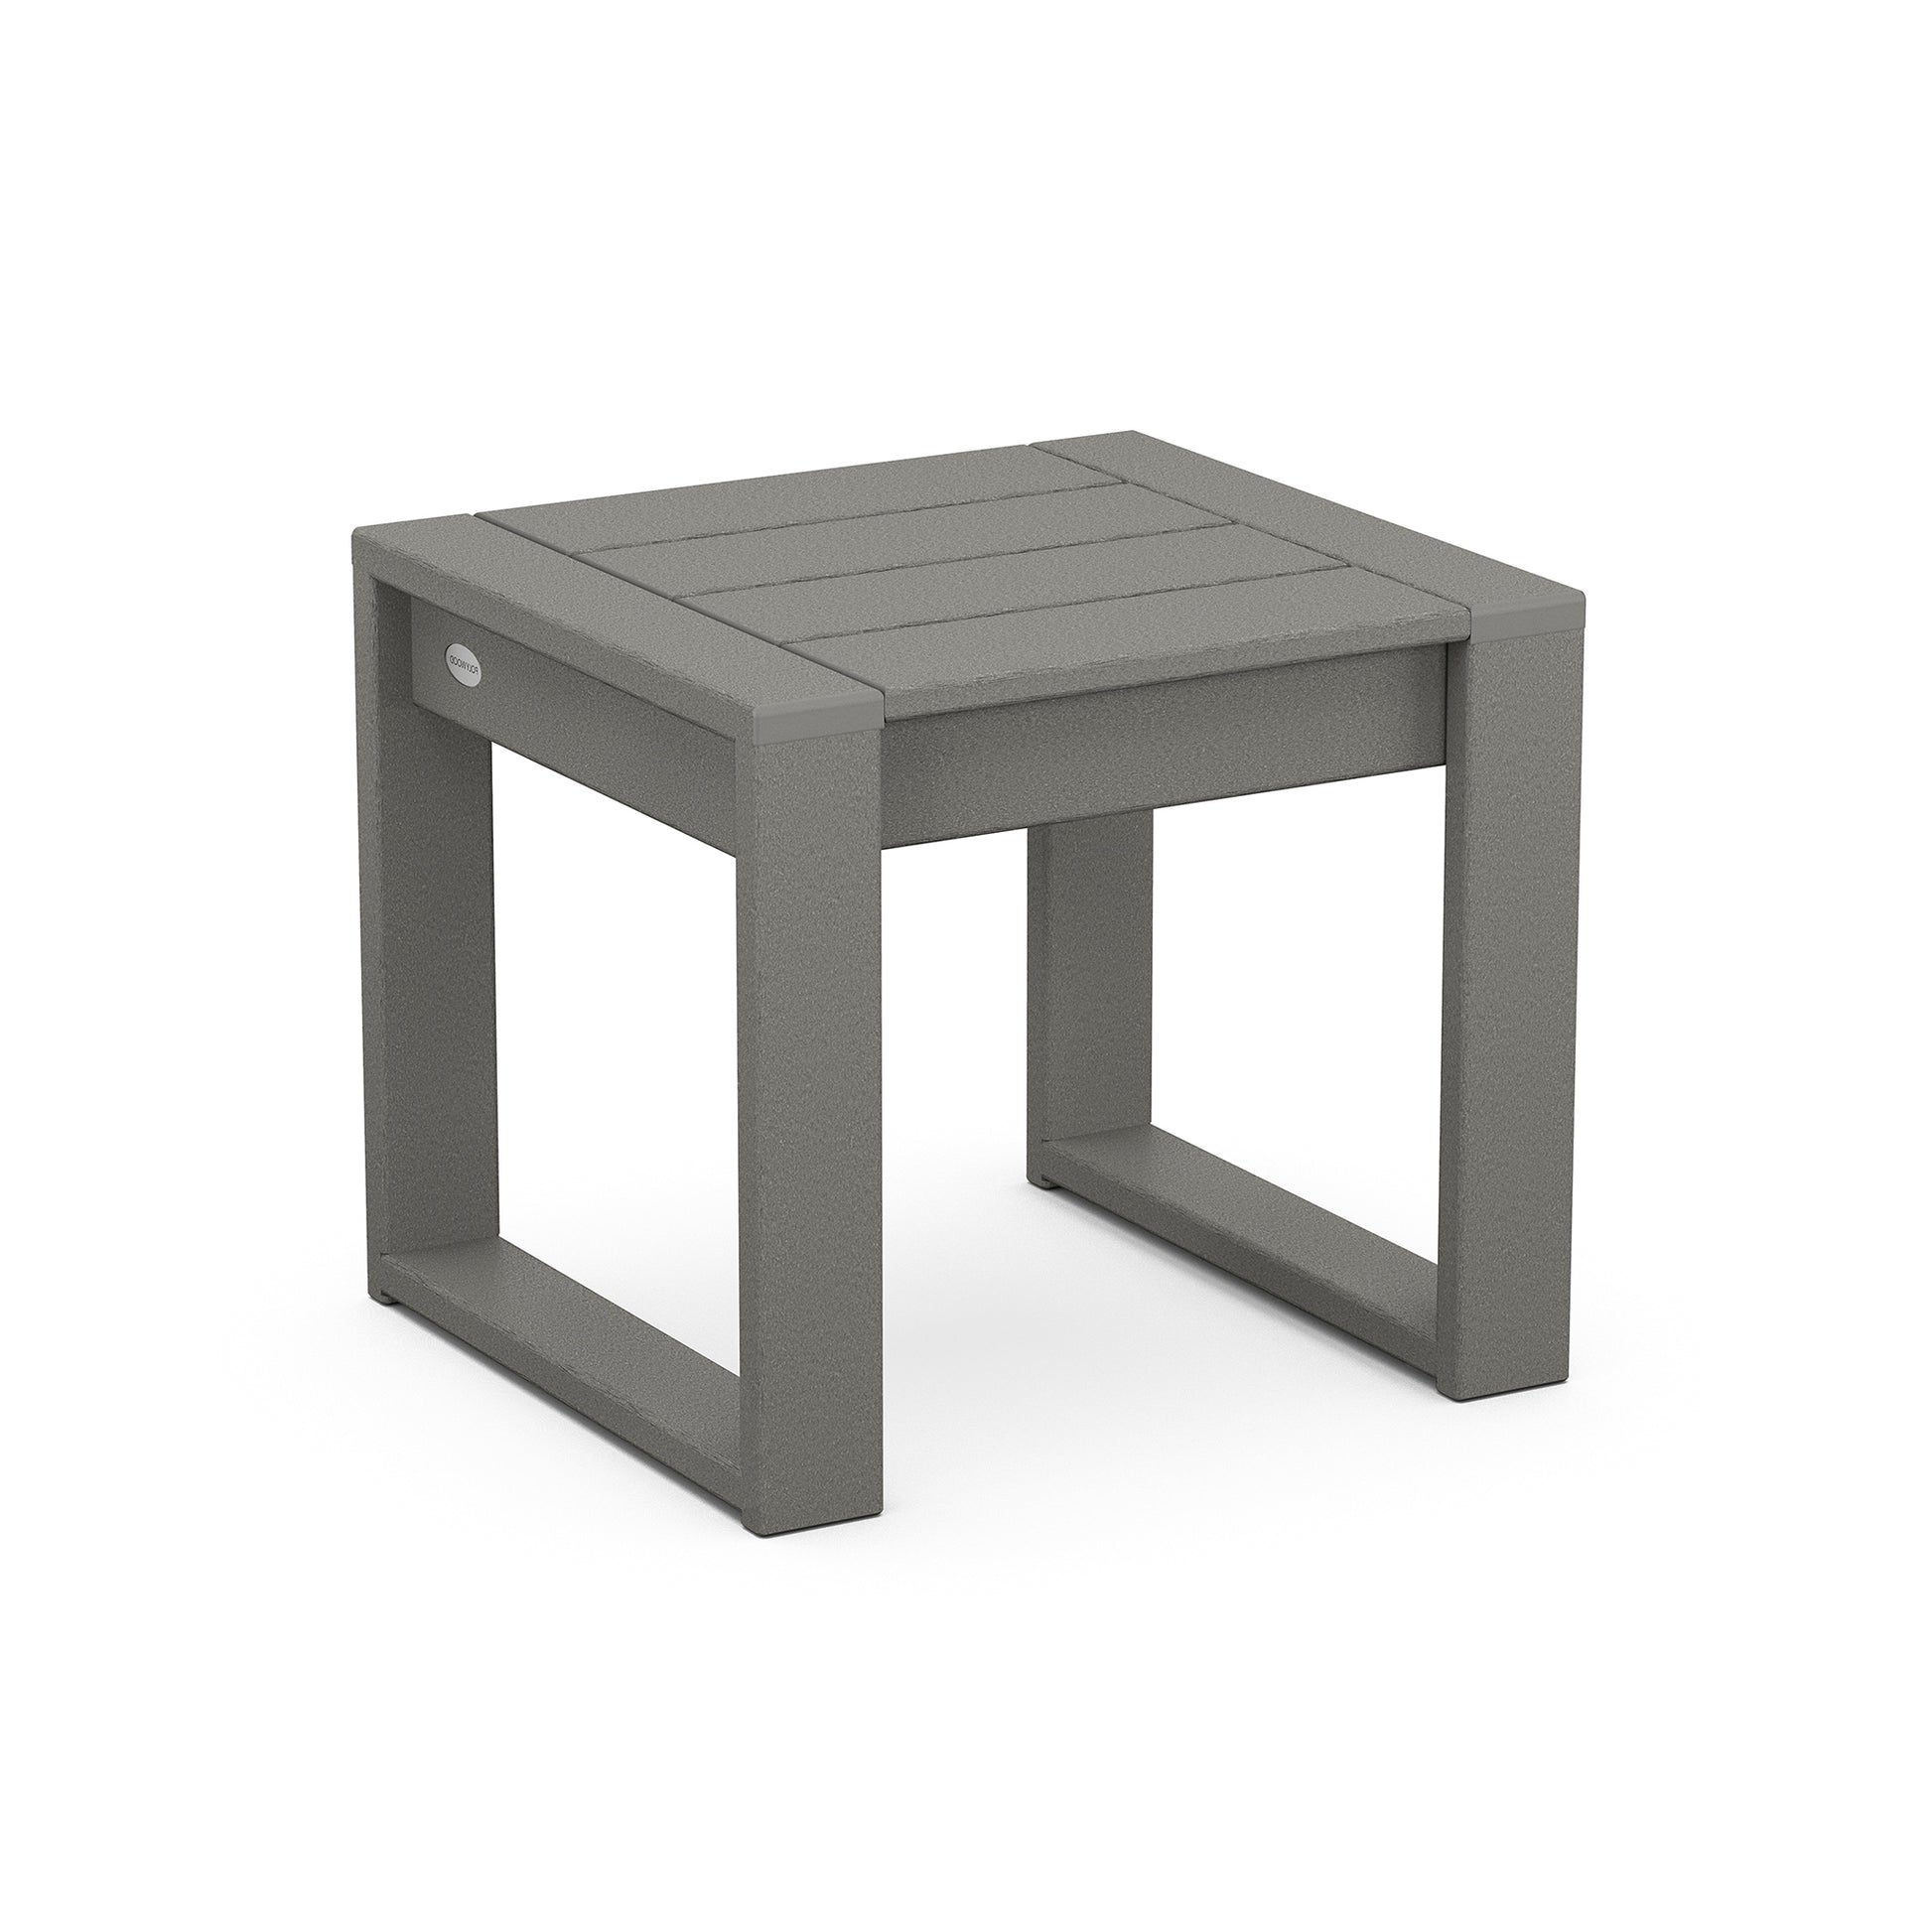 A 3D rendering of a simple, modern POLYWOOD EDGE End Table outdoor side table with a rectangular top and a flat, u-shaped base, shown against a plain white background.